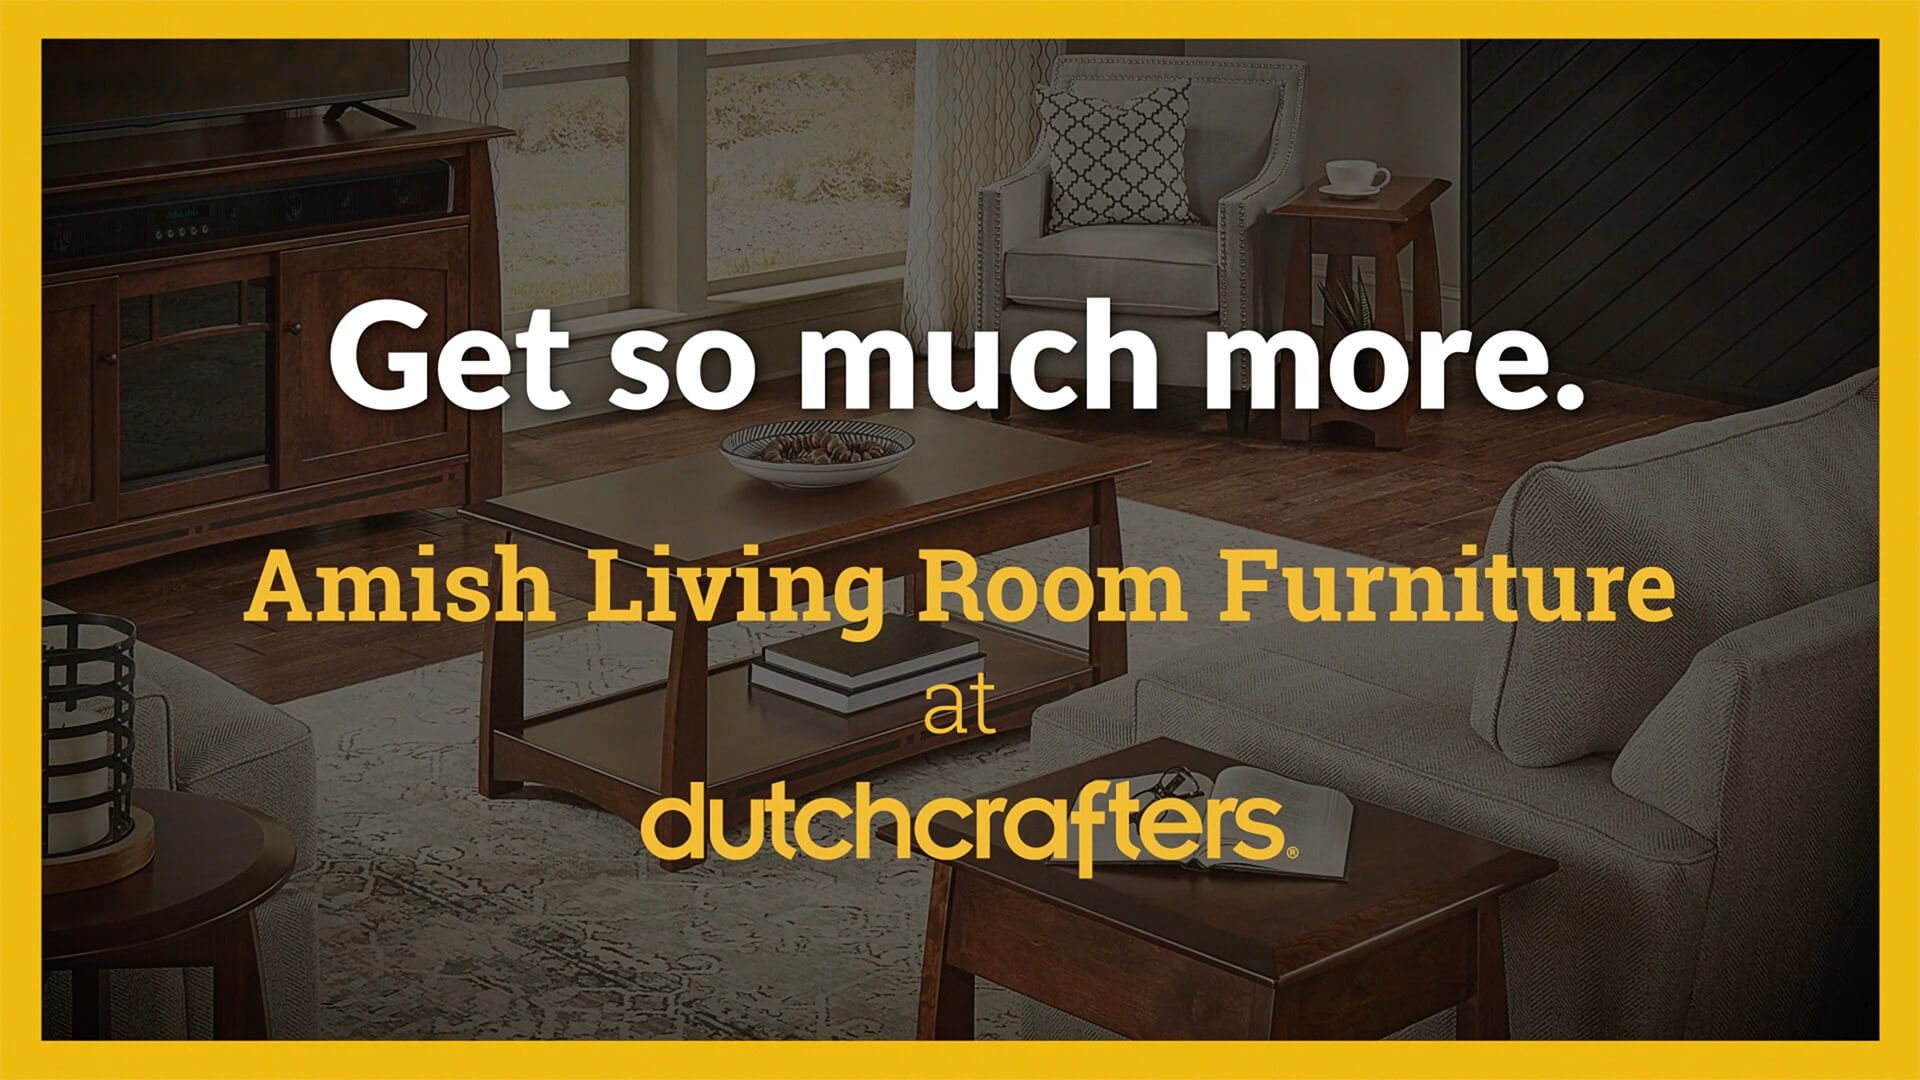 Image with text that says, "Get so much more with Amish Living Room Furniture at DutchCrafters"